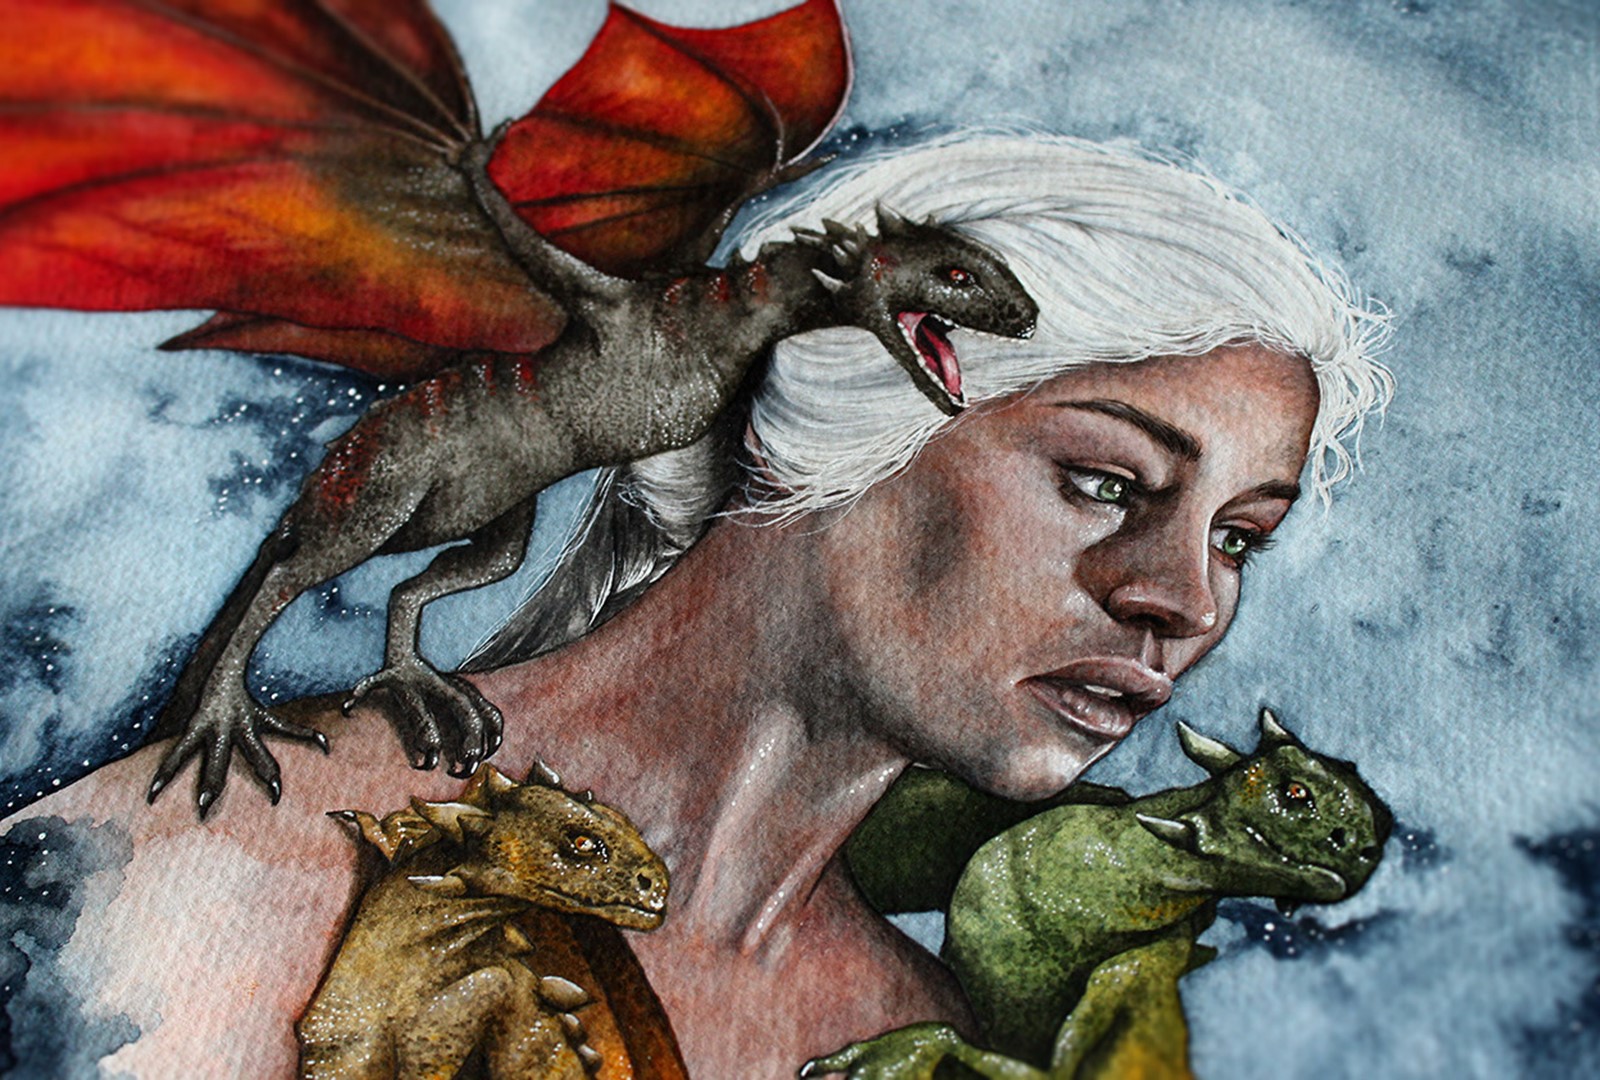 'The Mother of Dragons' by Holly Khraibani